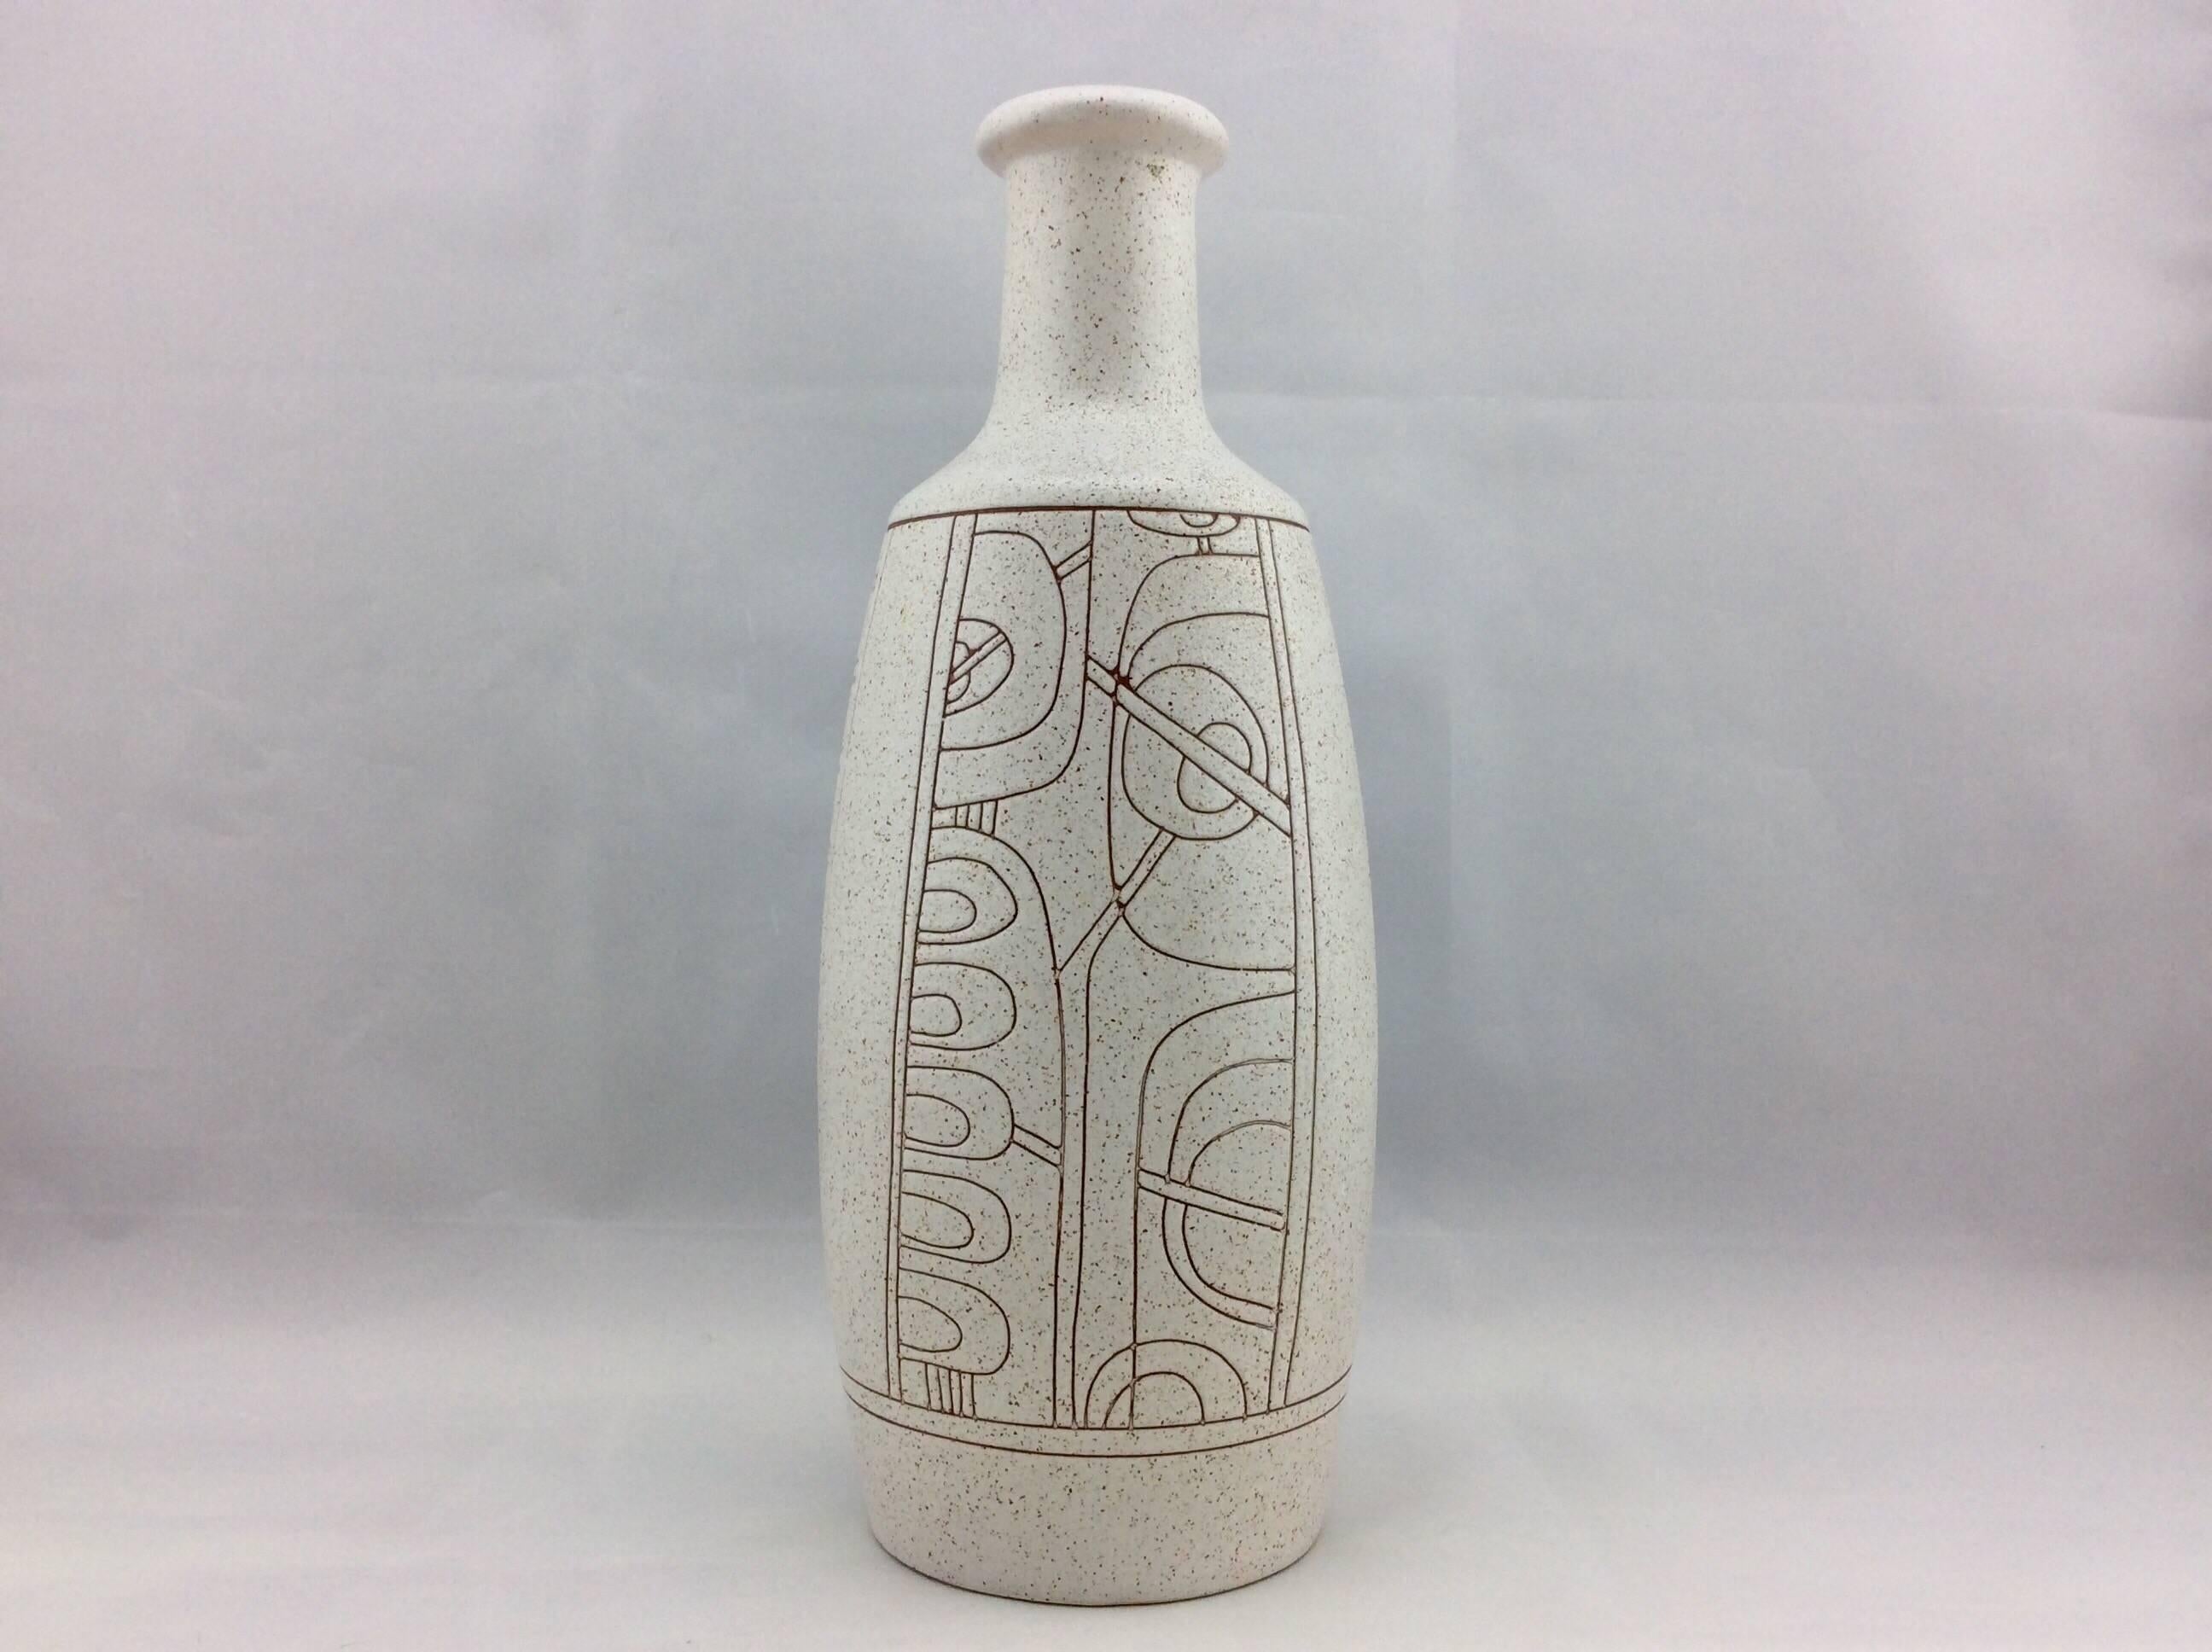 Mid-Century Modern vase with geometric pattern signed Lapid Israel.
 No known issues that detract from value or aesthetics. Ready for use.